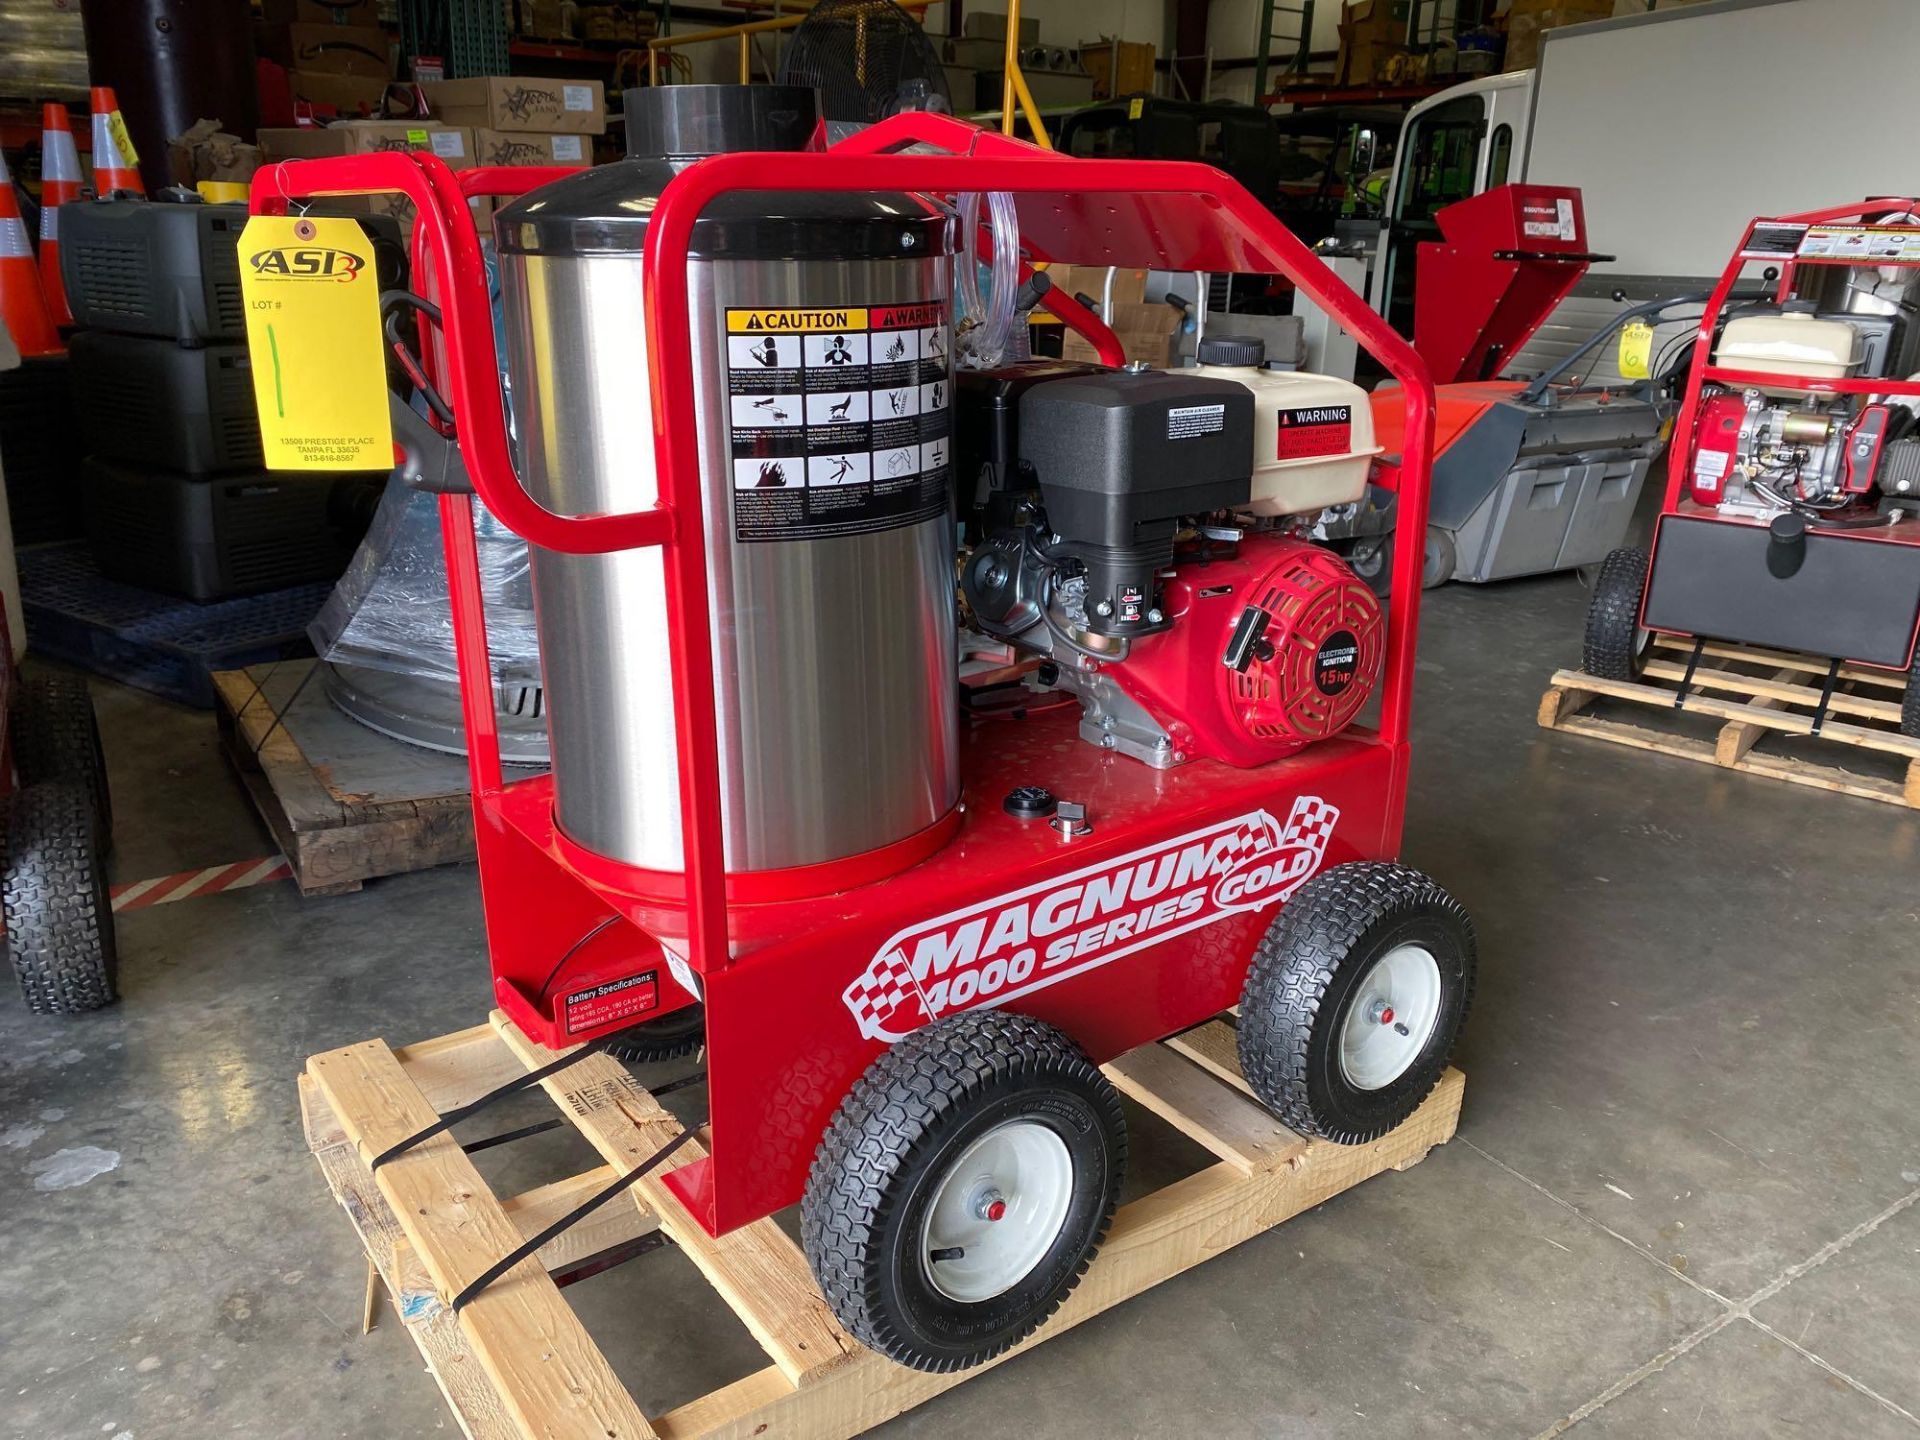 NEW 2019 MAGNUM 4000 PSI HEATED PRESSURE WASHER, ELECTRIC START, GAS POWERED WITH DIESEL BURNER, HOS